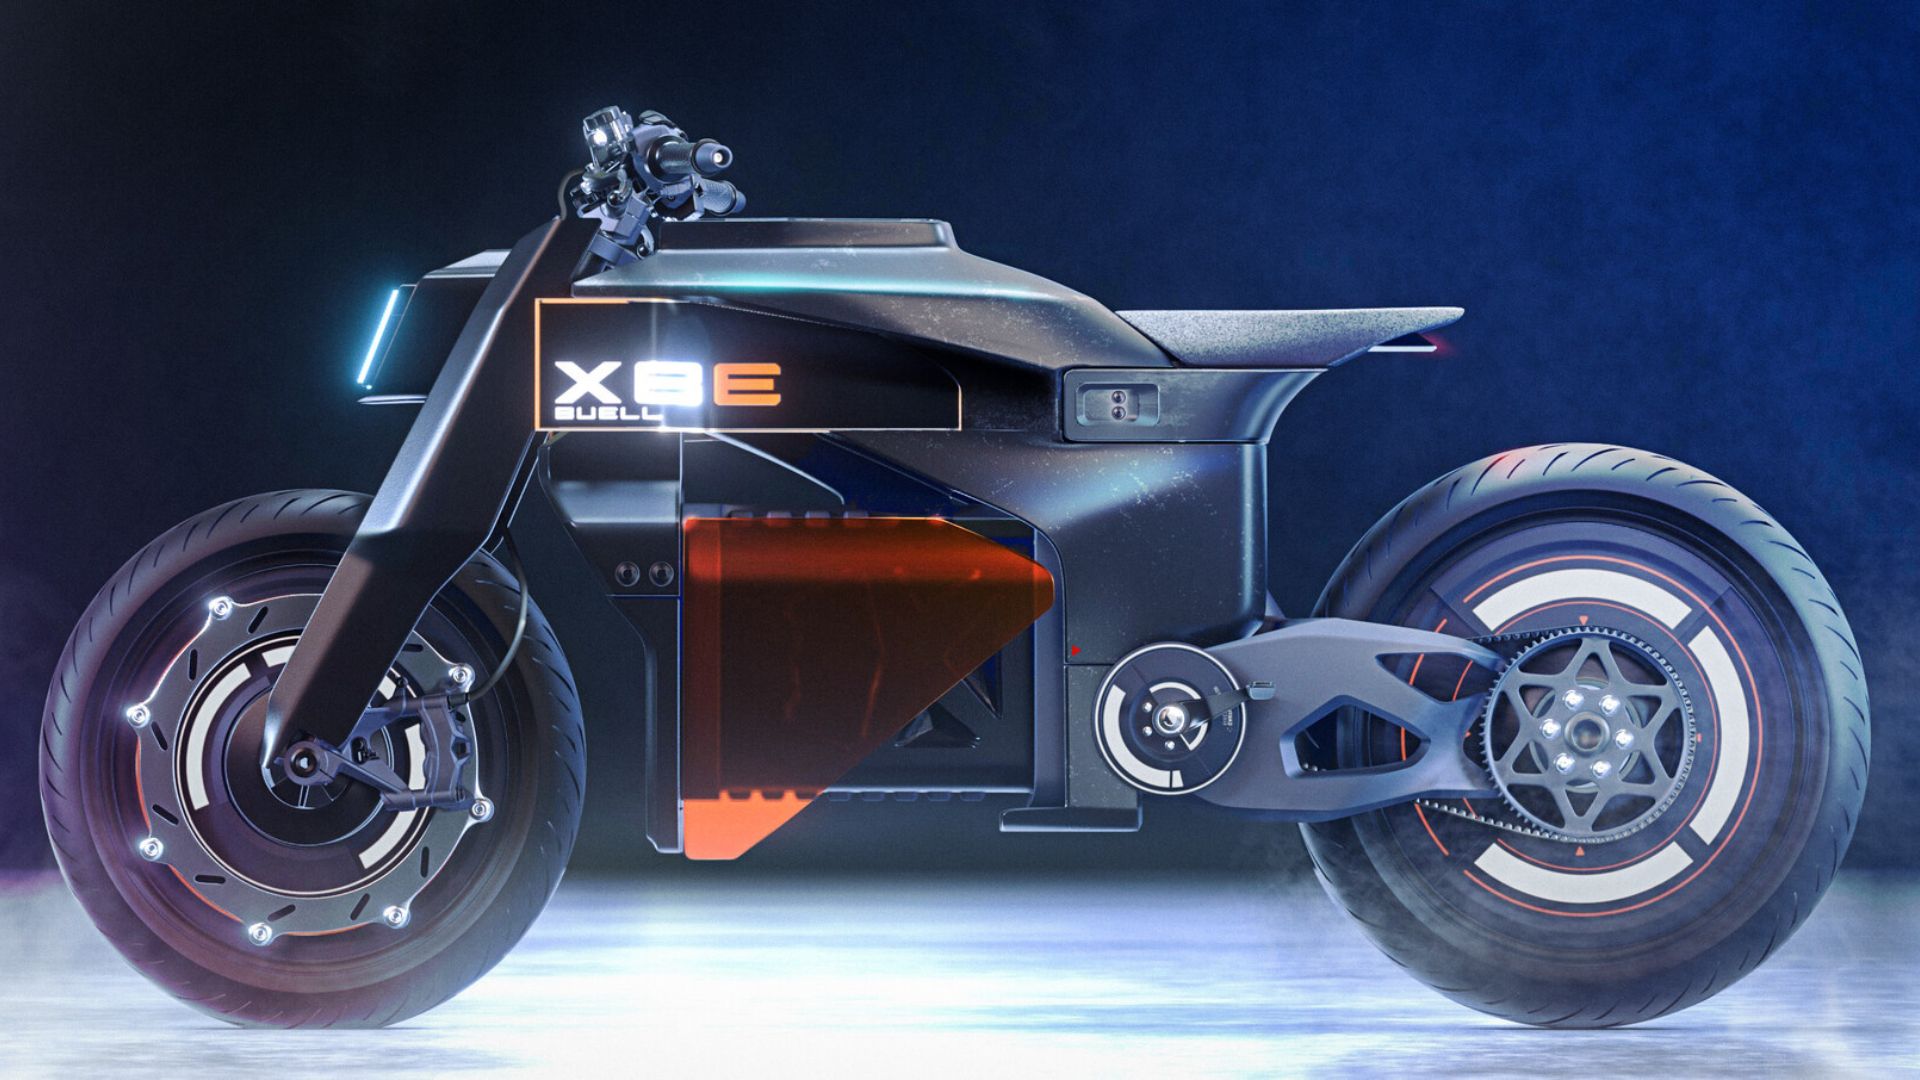 To Buell XBE Concept δεν ξεχνά τις ρίζες του!